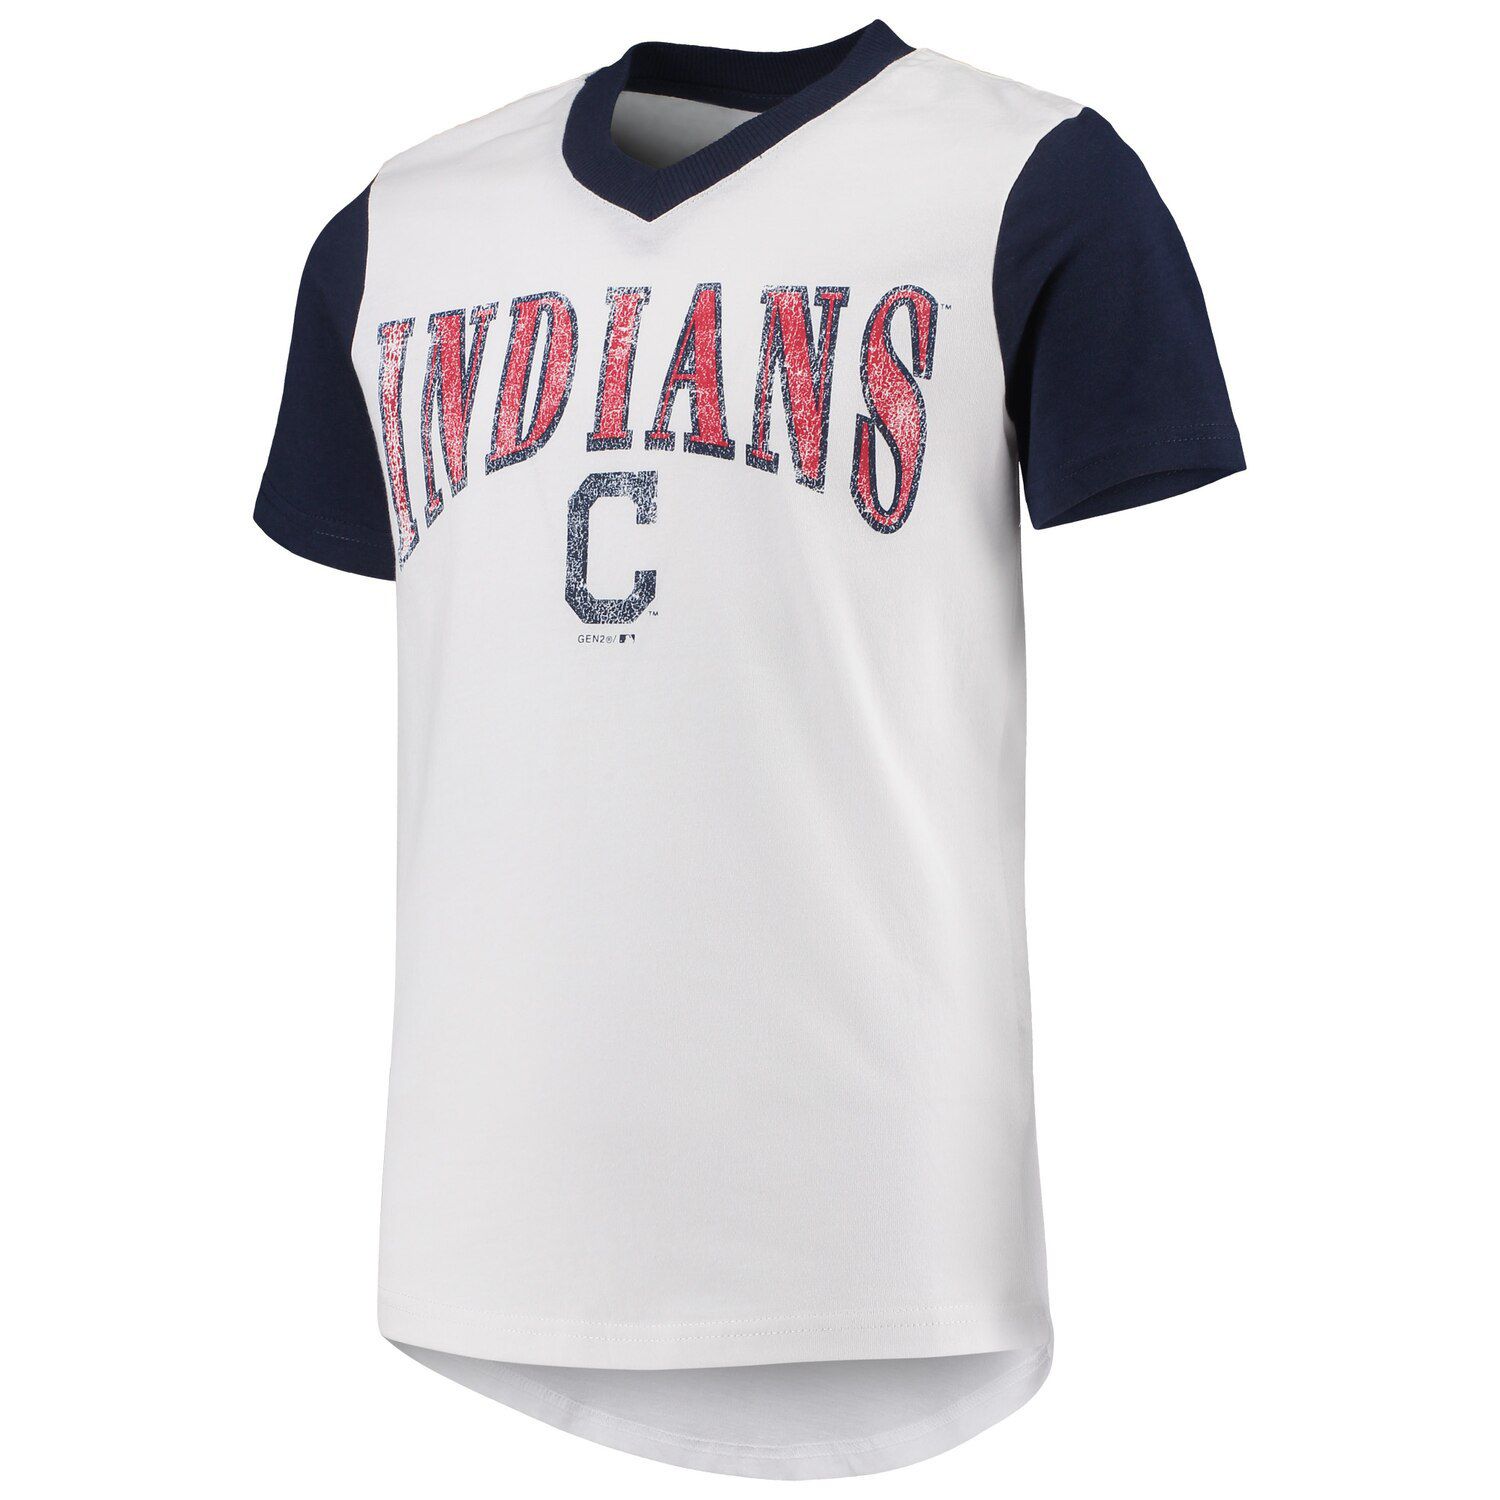 cleveland indians jersey youth